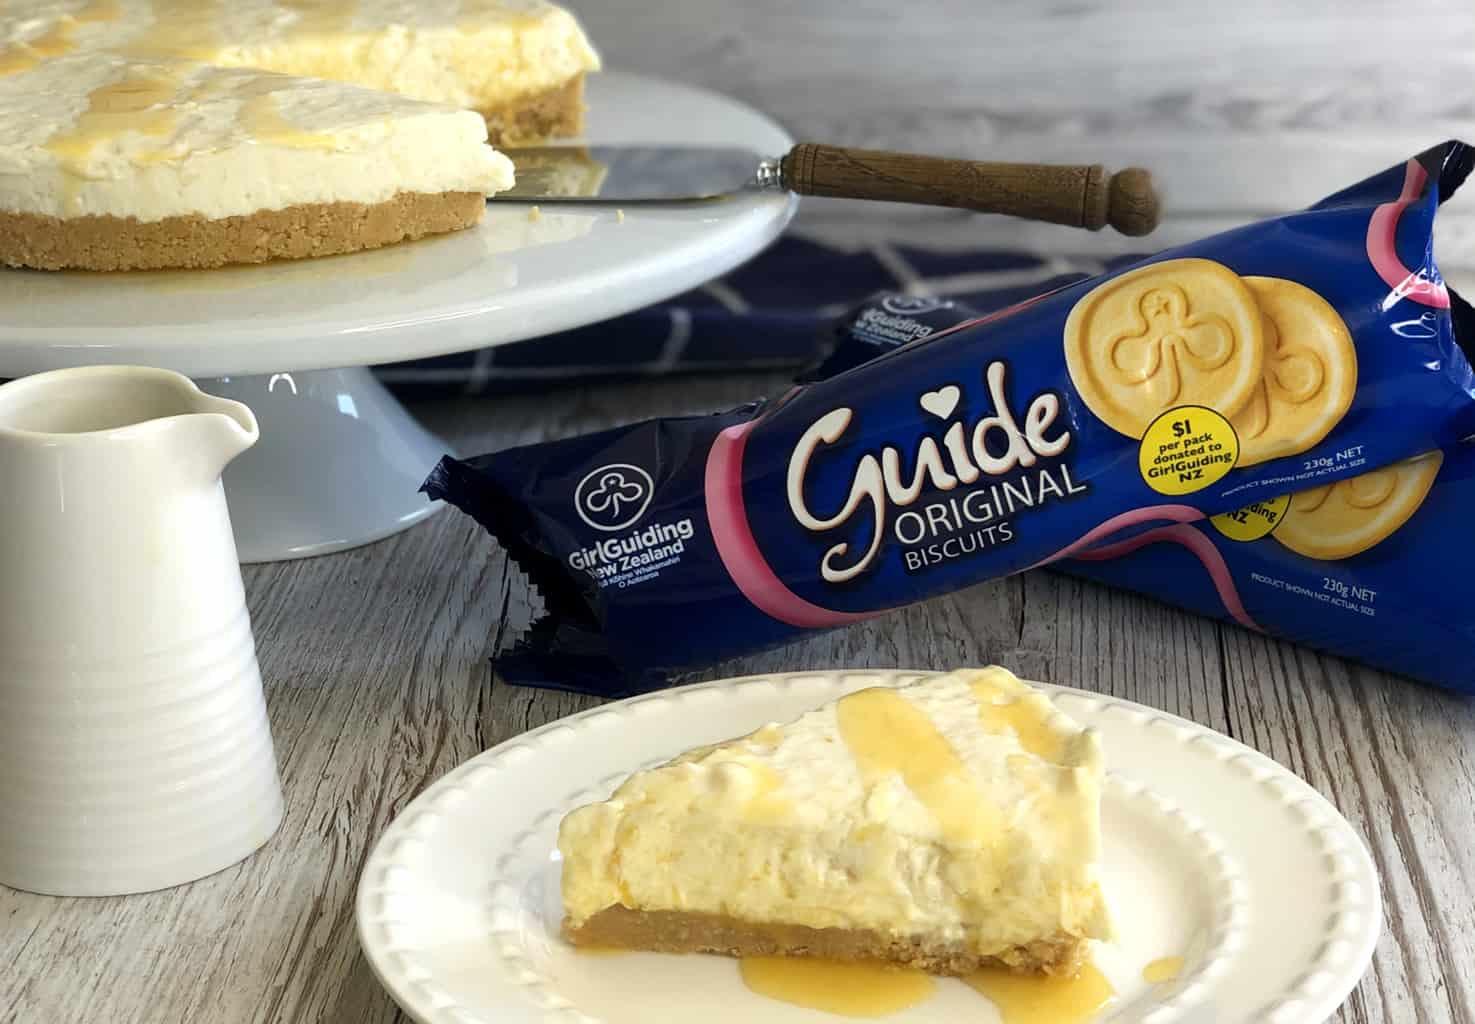 Girl Guide biscuits and a pineapple cheesecake with a jug of passionfruit glaze 